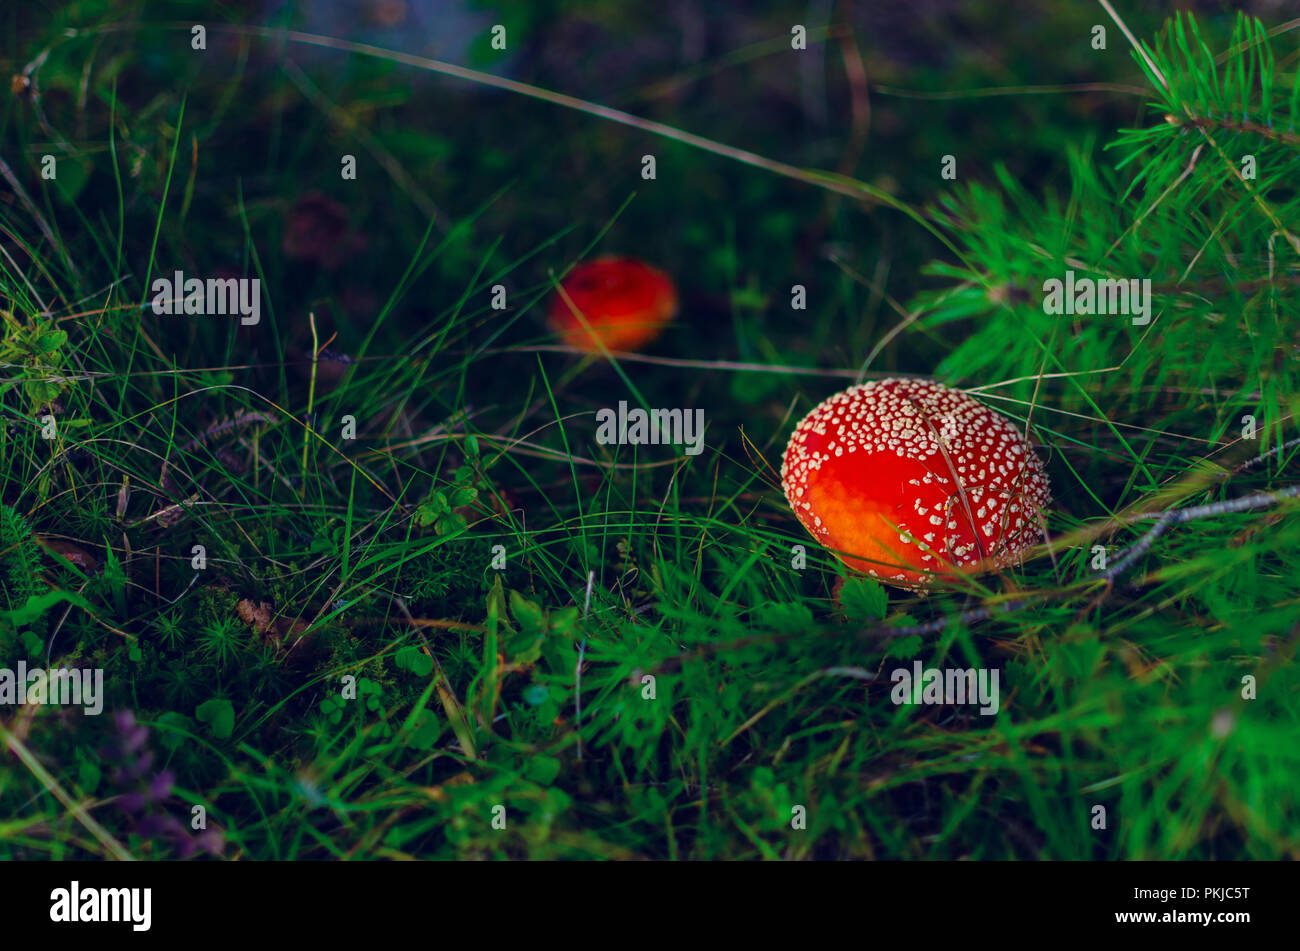 Beautiful and colorful amanita dangerous mushrooms with bright red head. Stock Photo